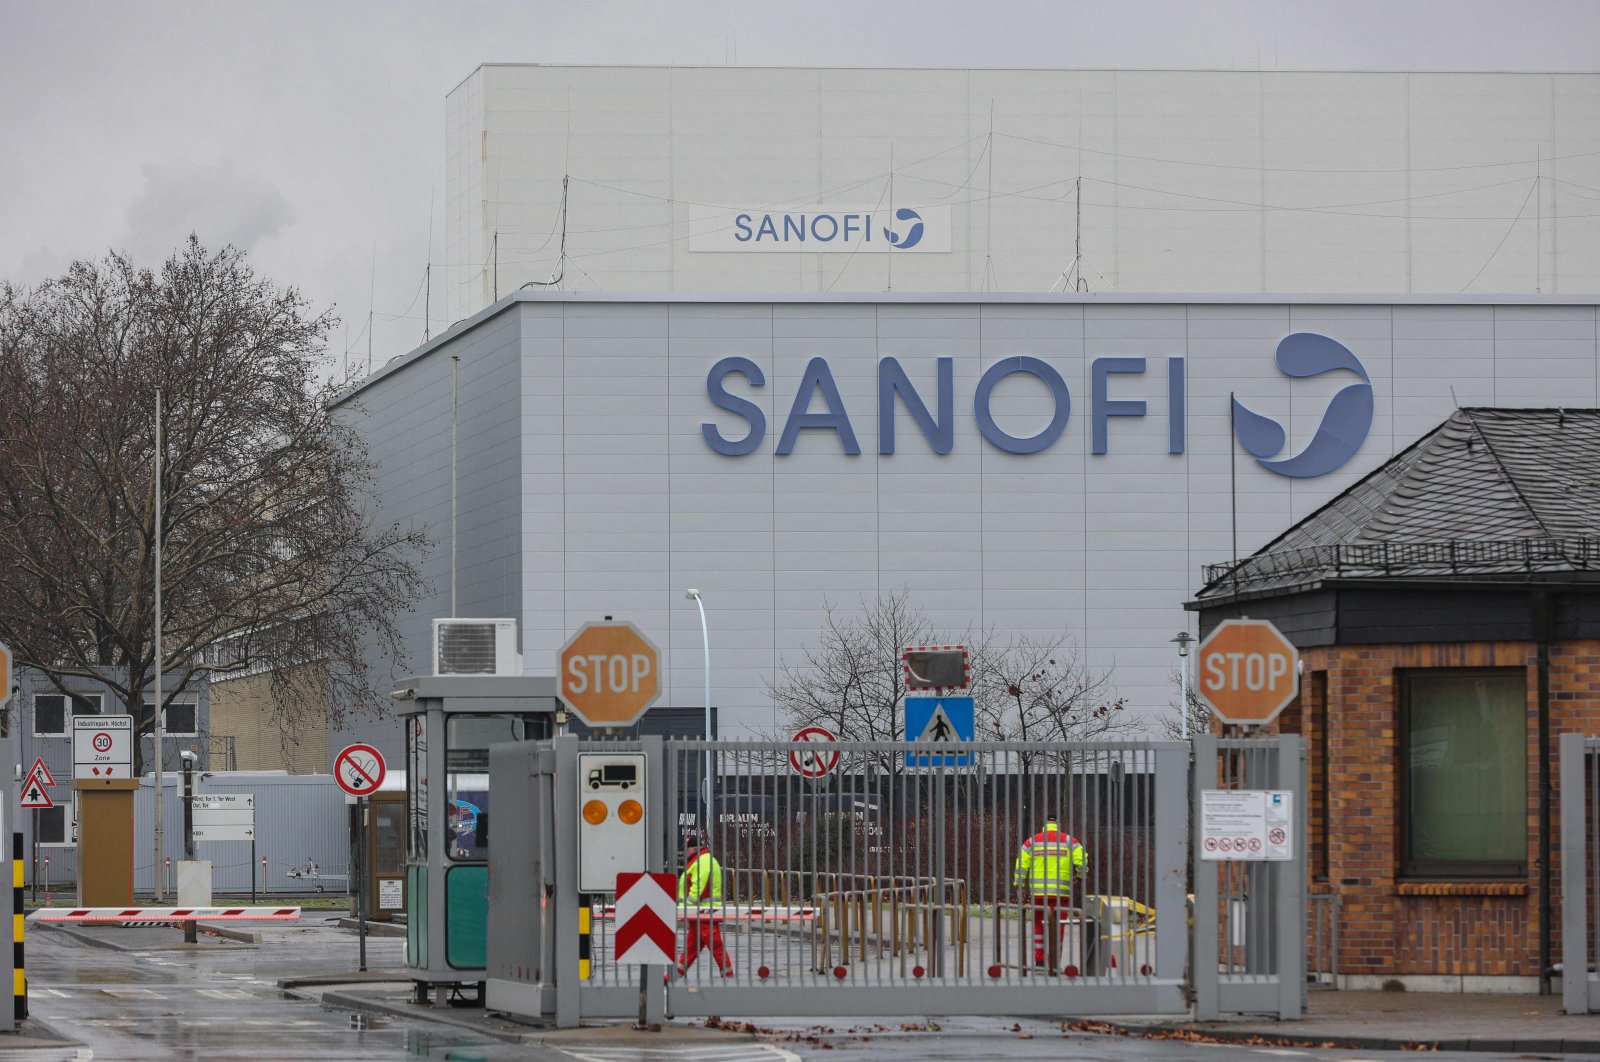 An entrance to the compound of the German headquarter of French pharmaceutical company Sanofi is pictured in the Hoechst industrial zone in Frankfurt am Main, western Germany, Jan. 27, 2021. (AFP Photo)